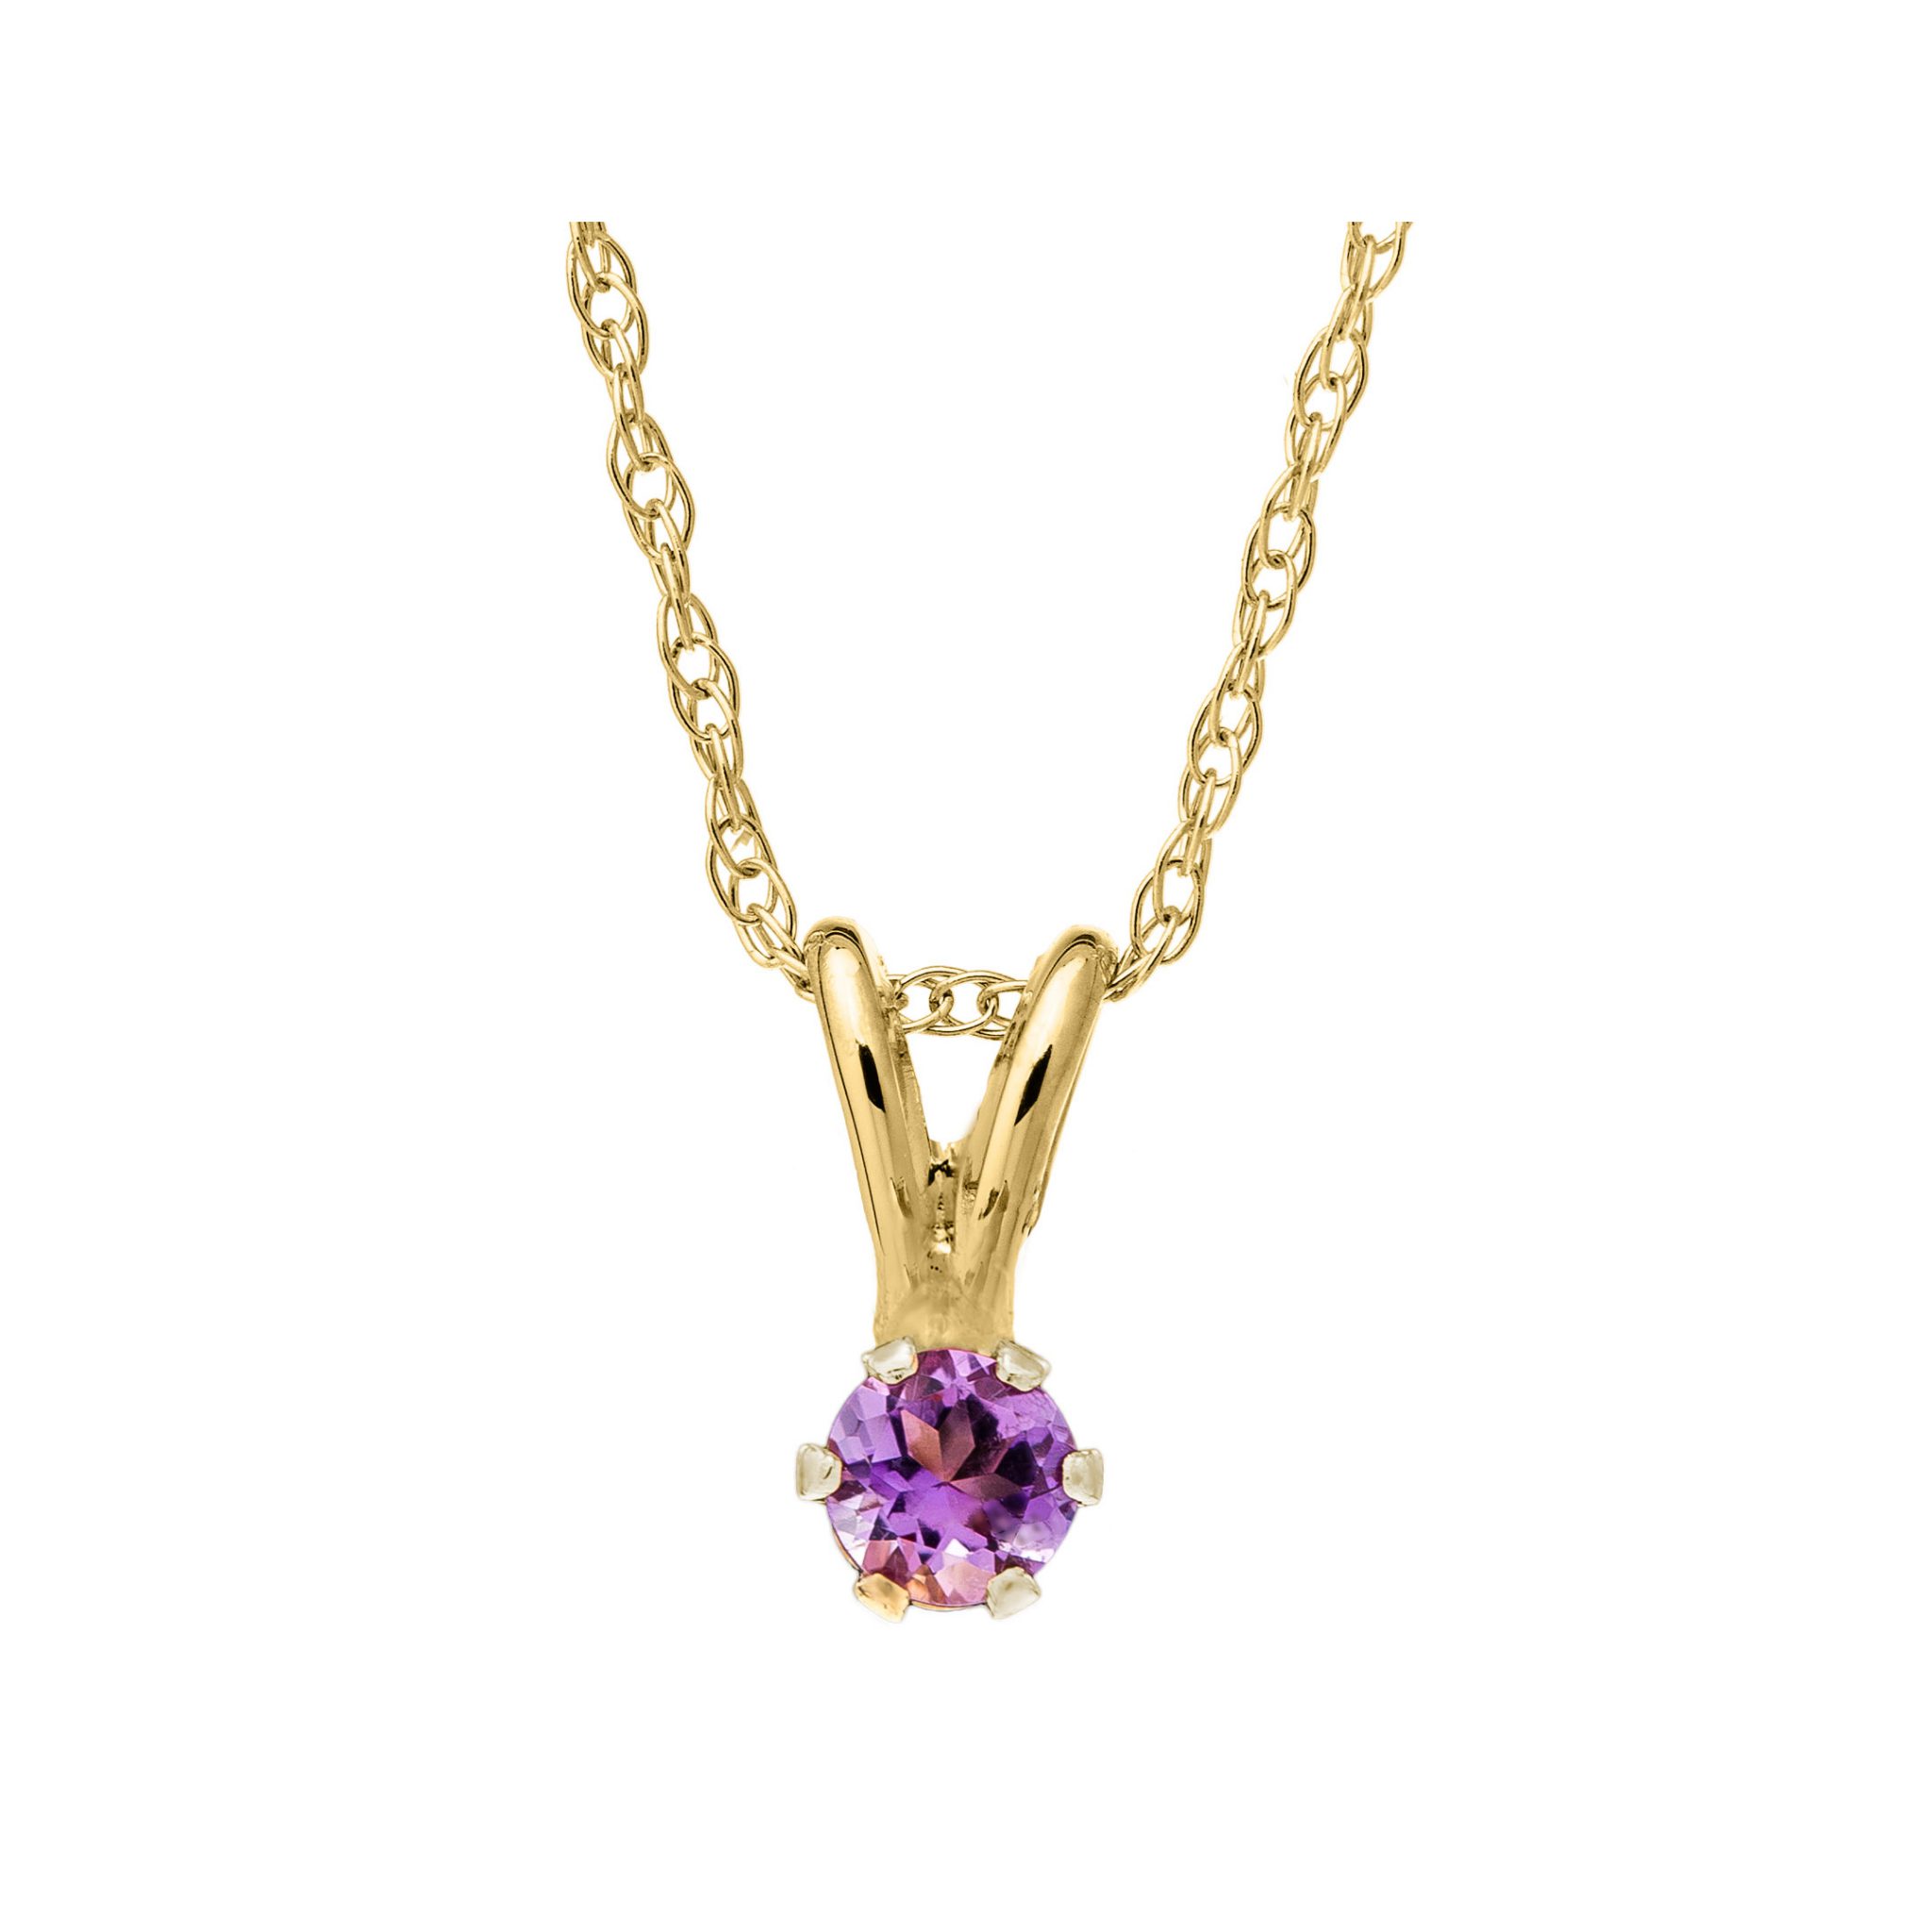 Bailey’s Children’s Collection February Birthstone Amethyst Pendant ...